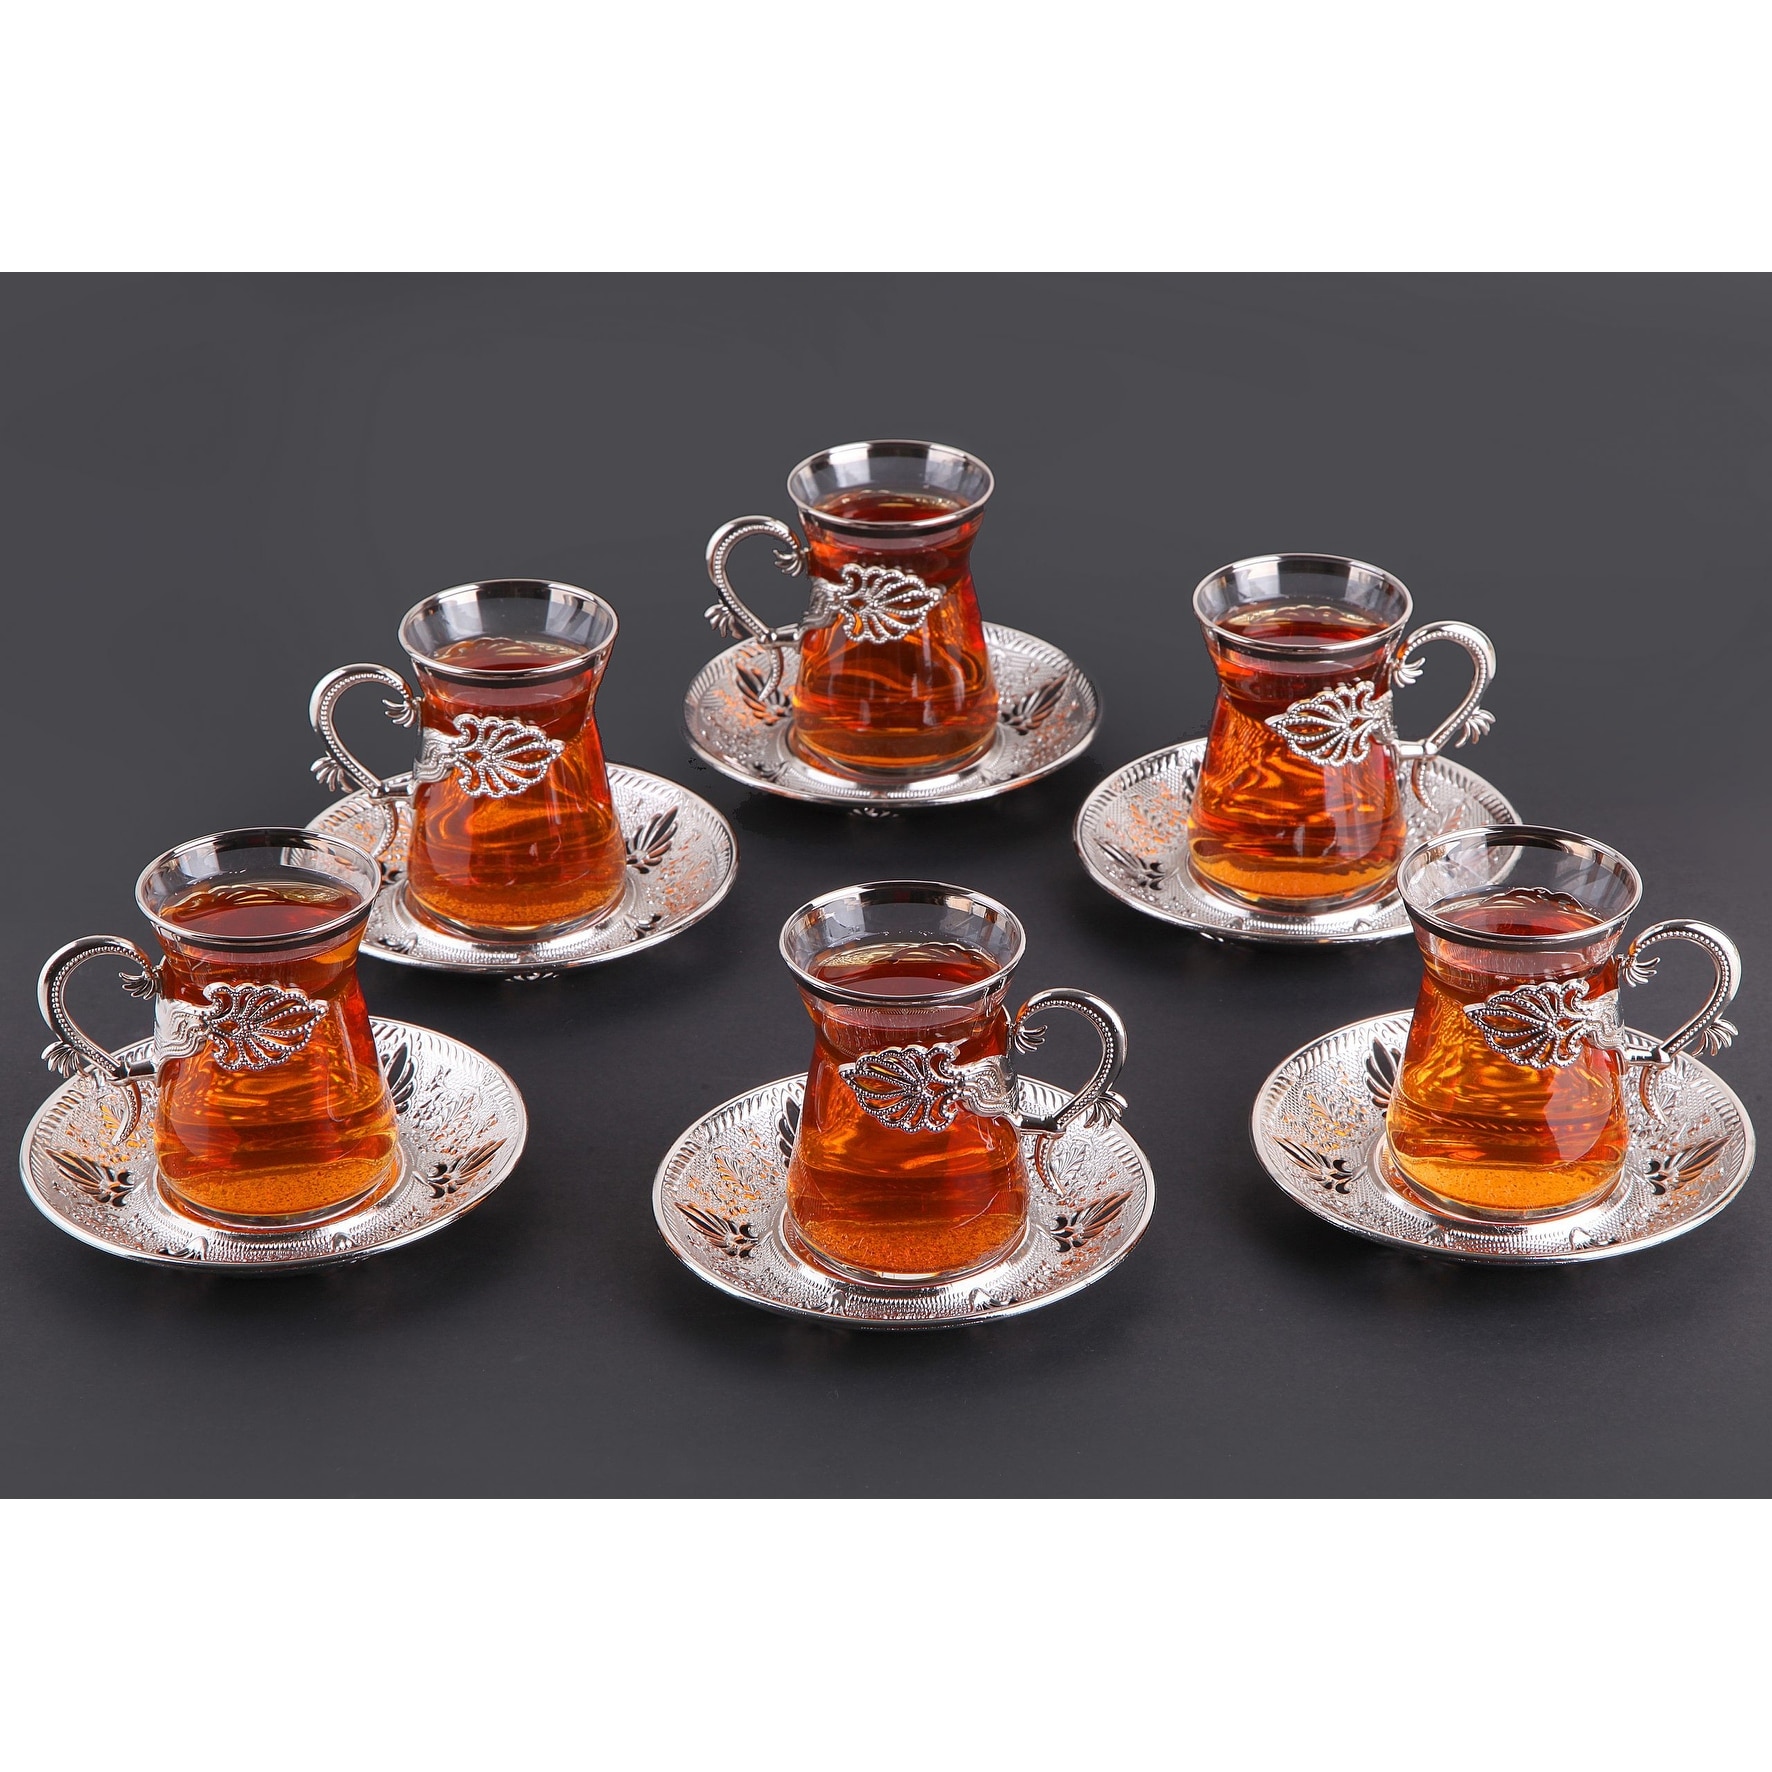 Irem Authentic Armudu Tea Glass and Saucer Set for 6